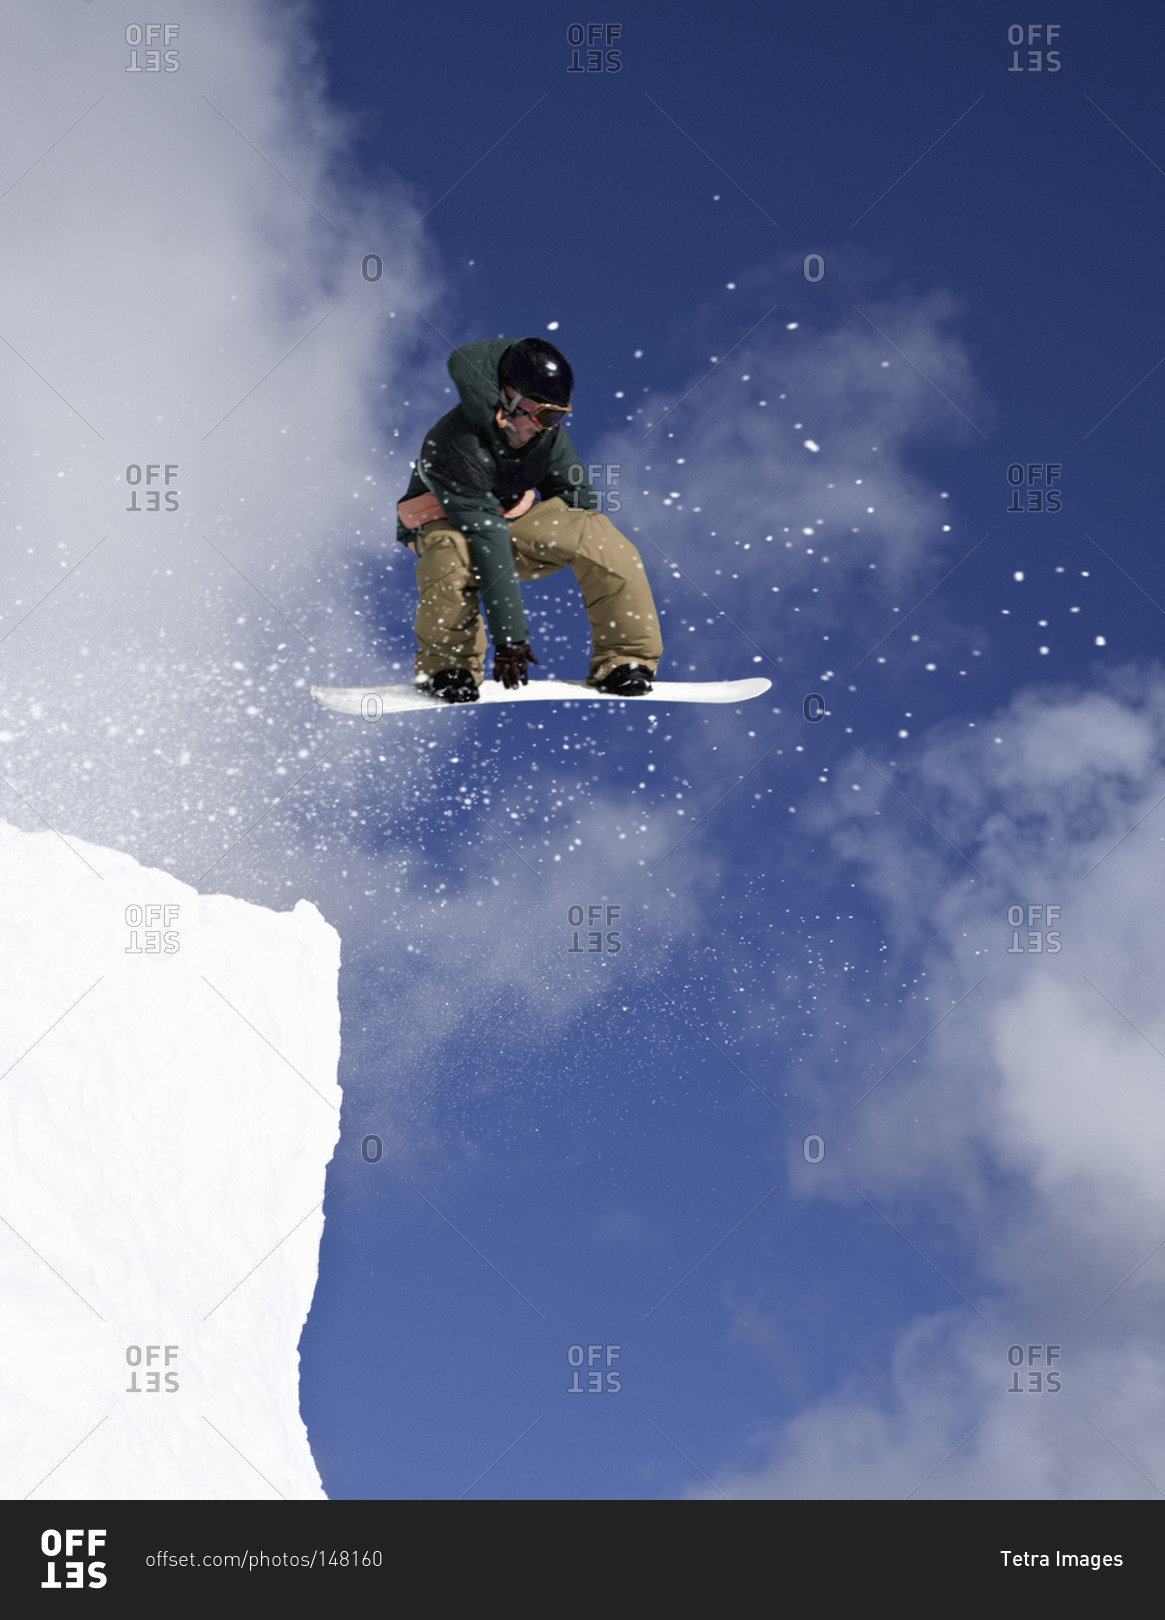 Snowboarder in mid-air